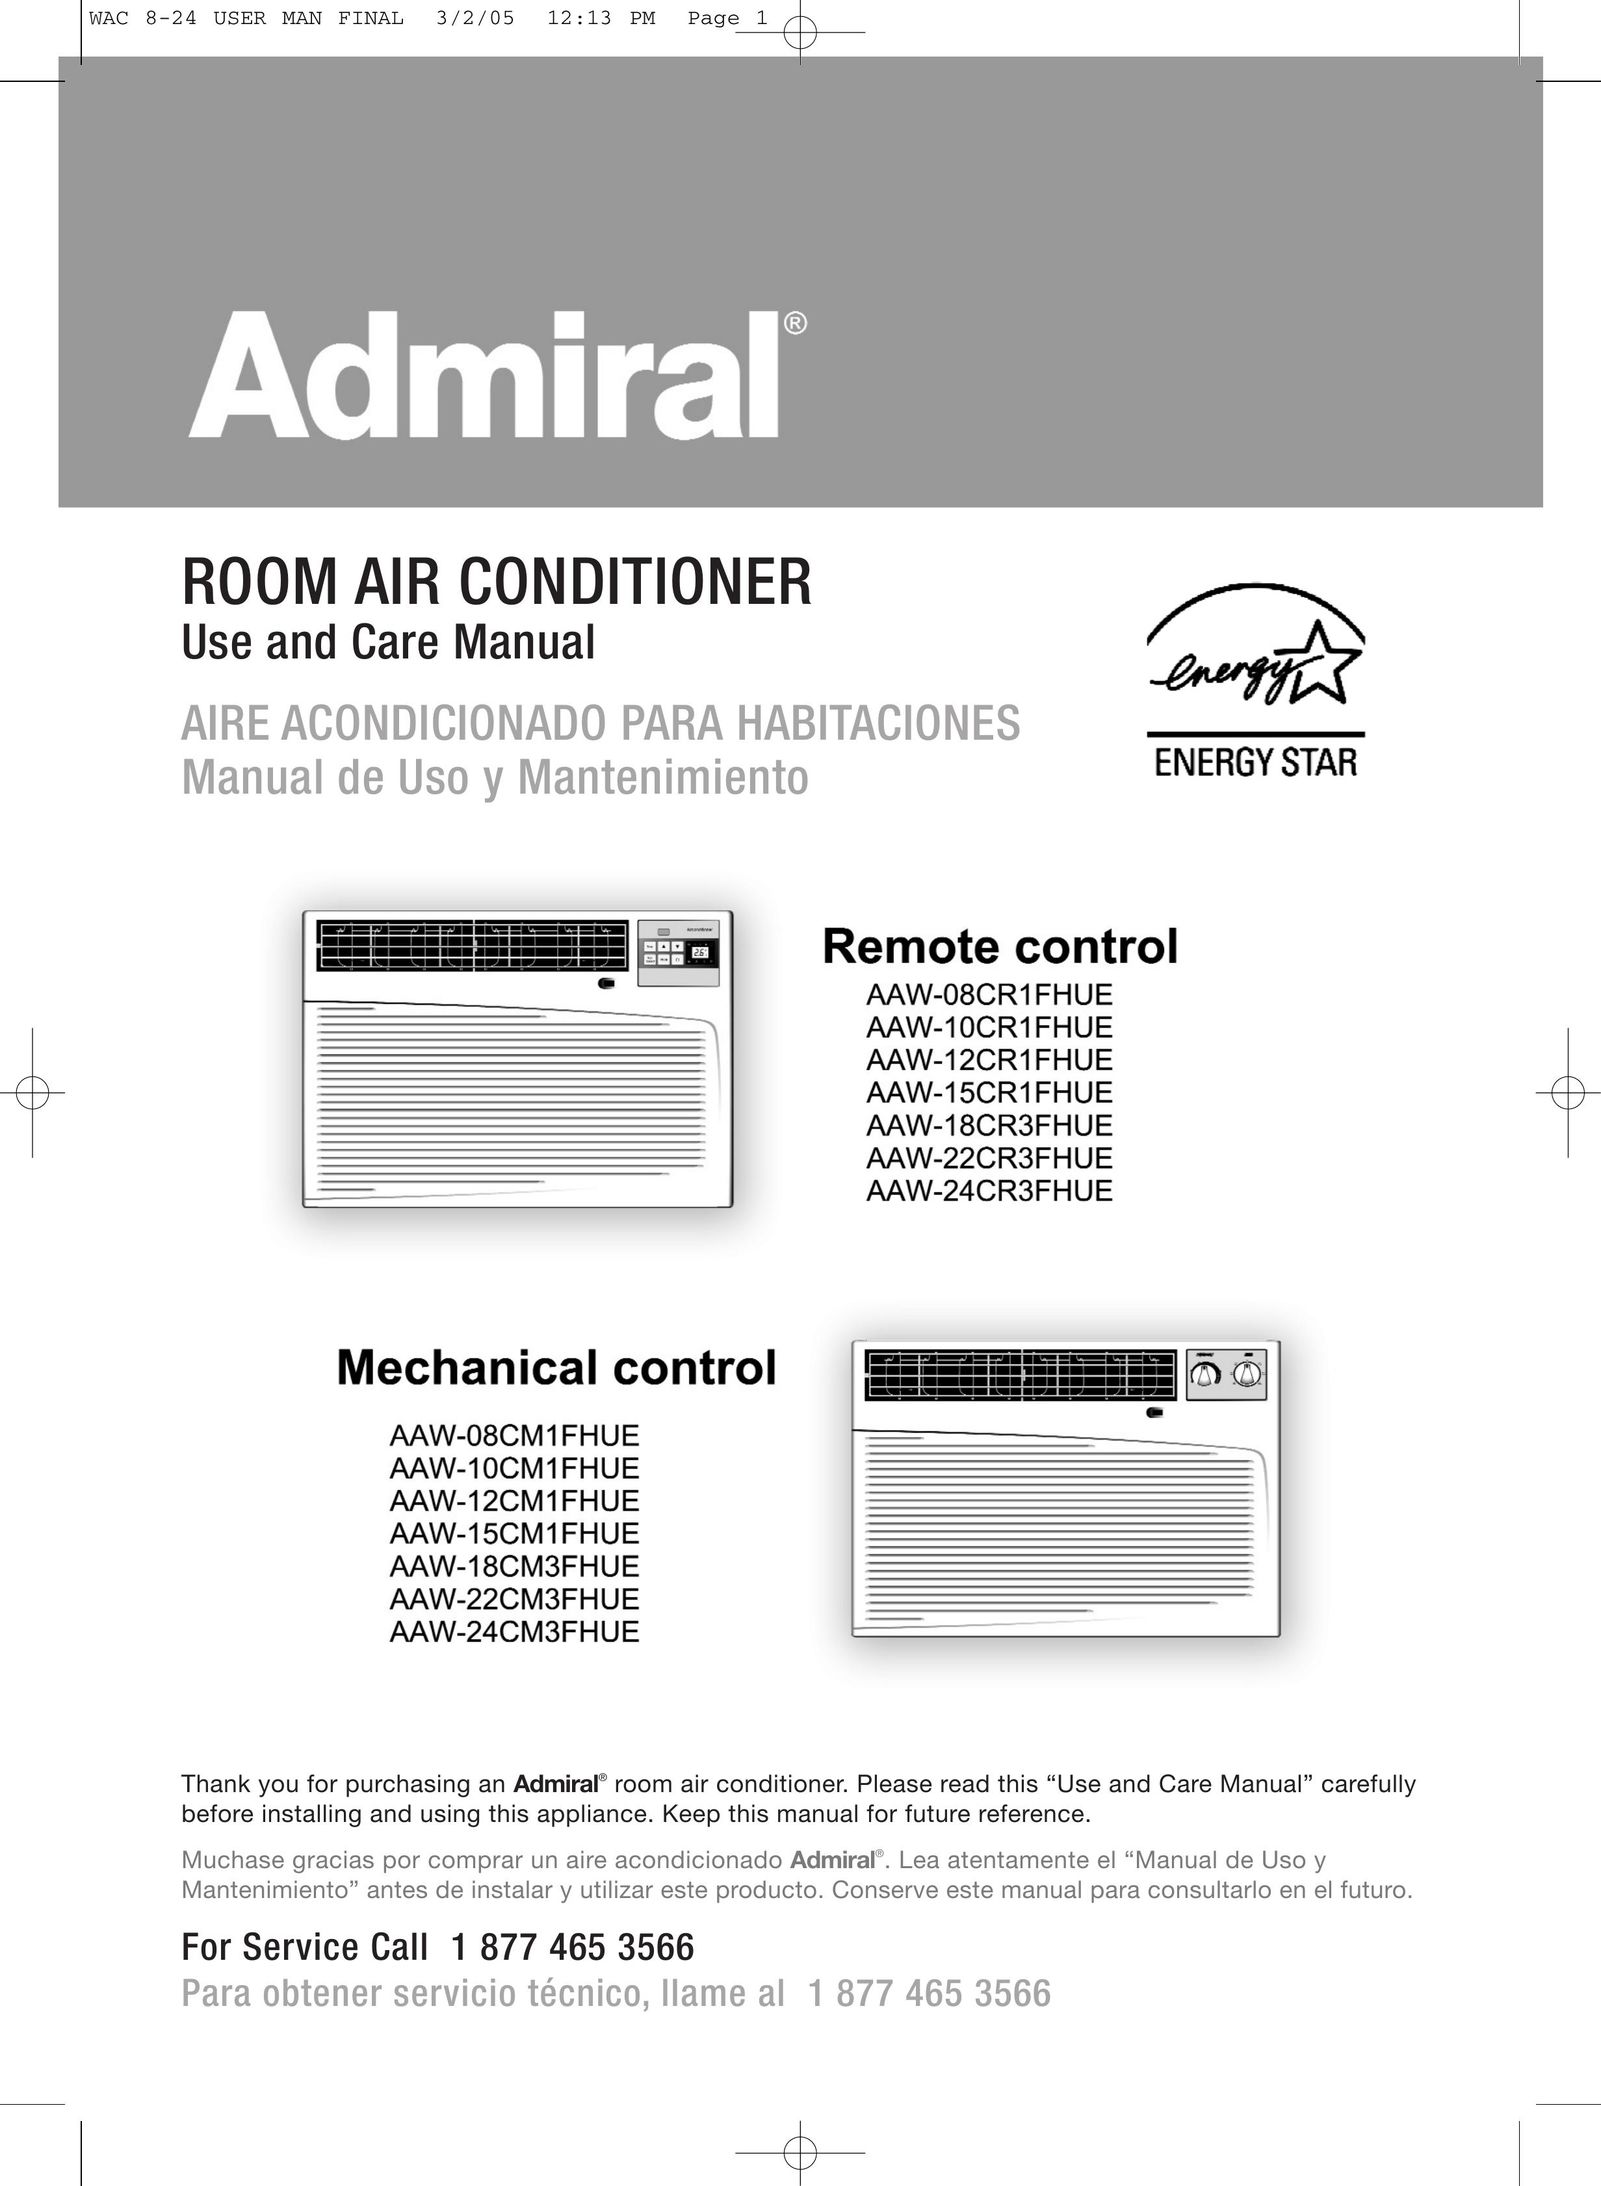 Admiral AAW-22CM1FHUE Air Conditioner User Manual